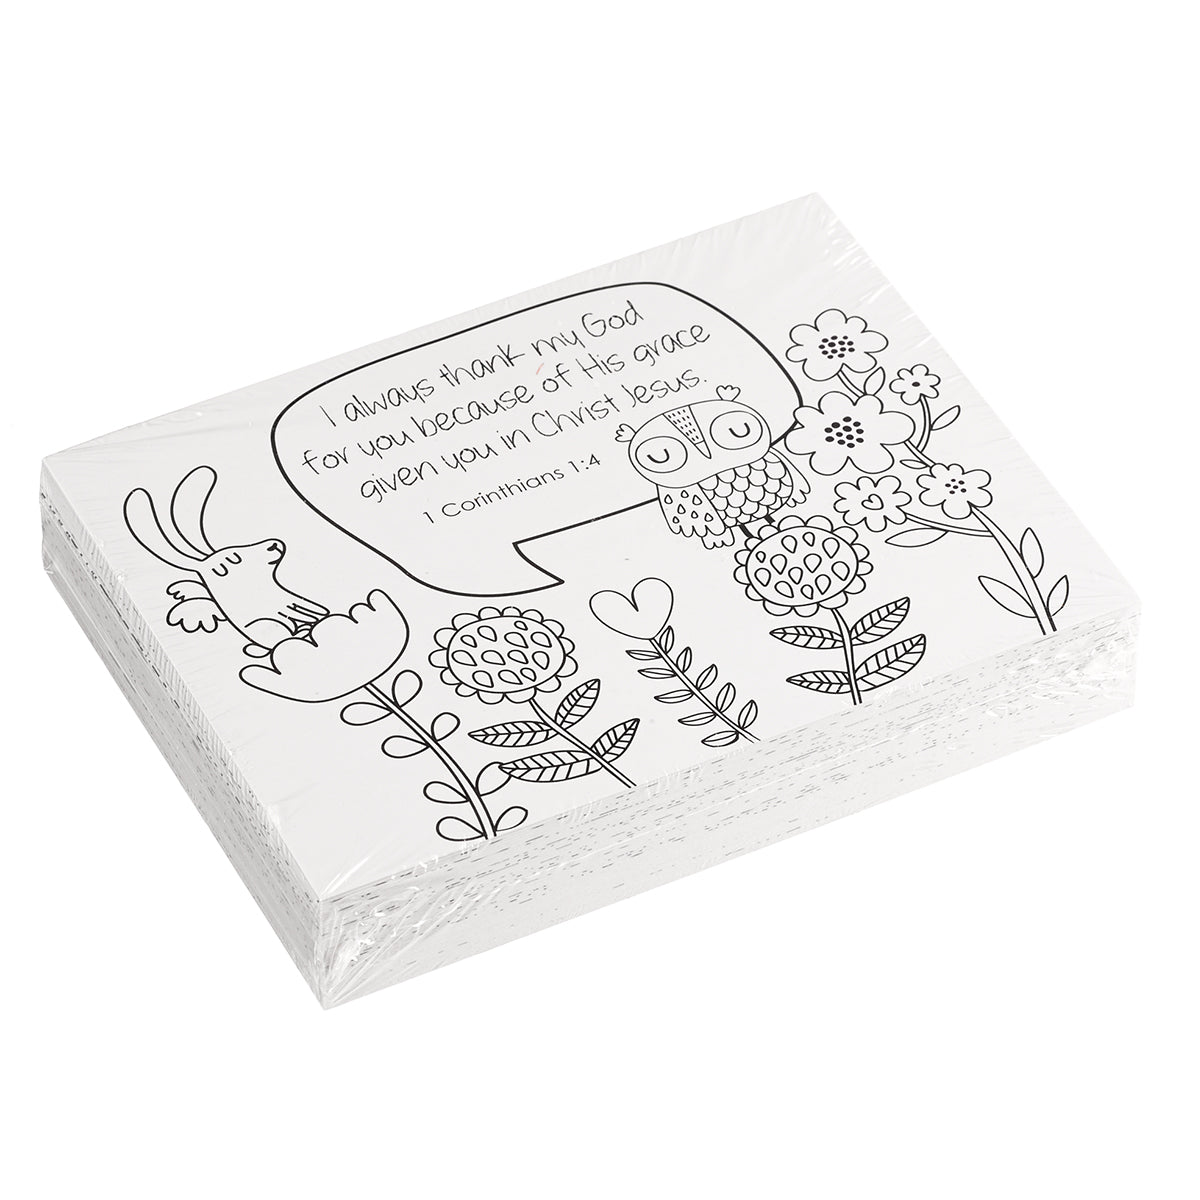 Image of Creative Expressions Colouring Cards other